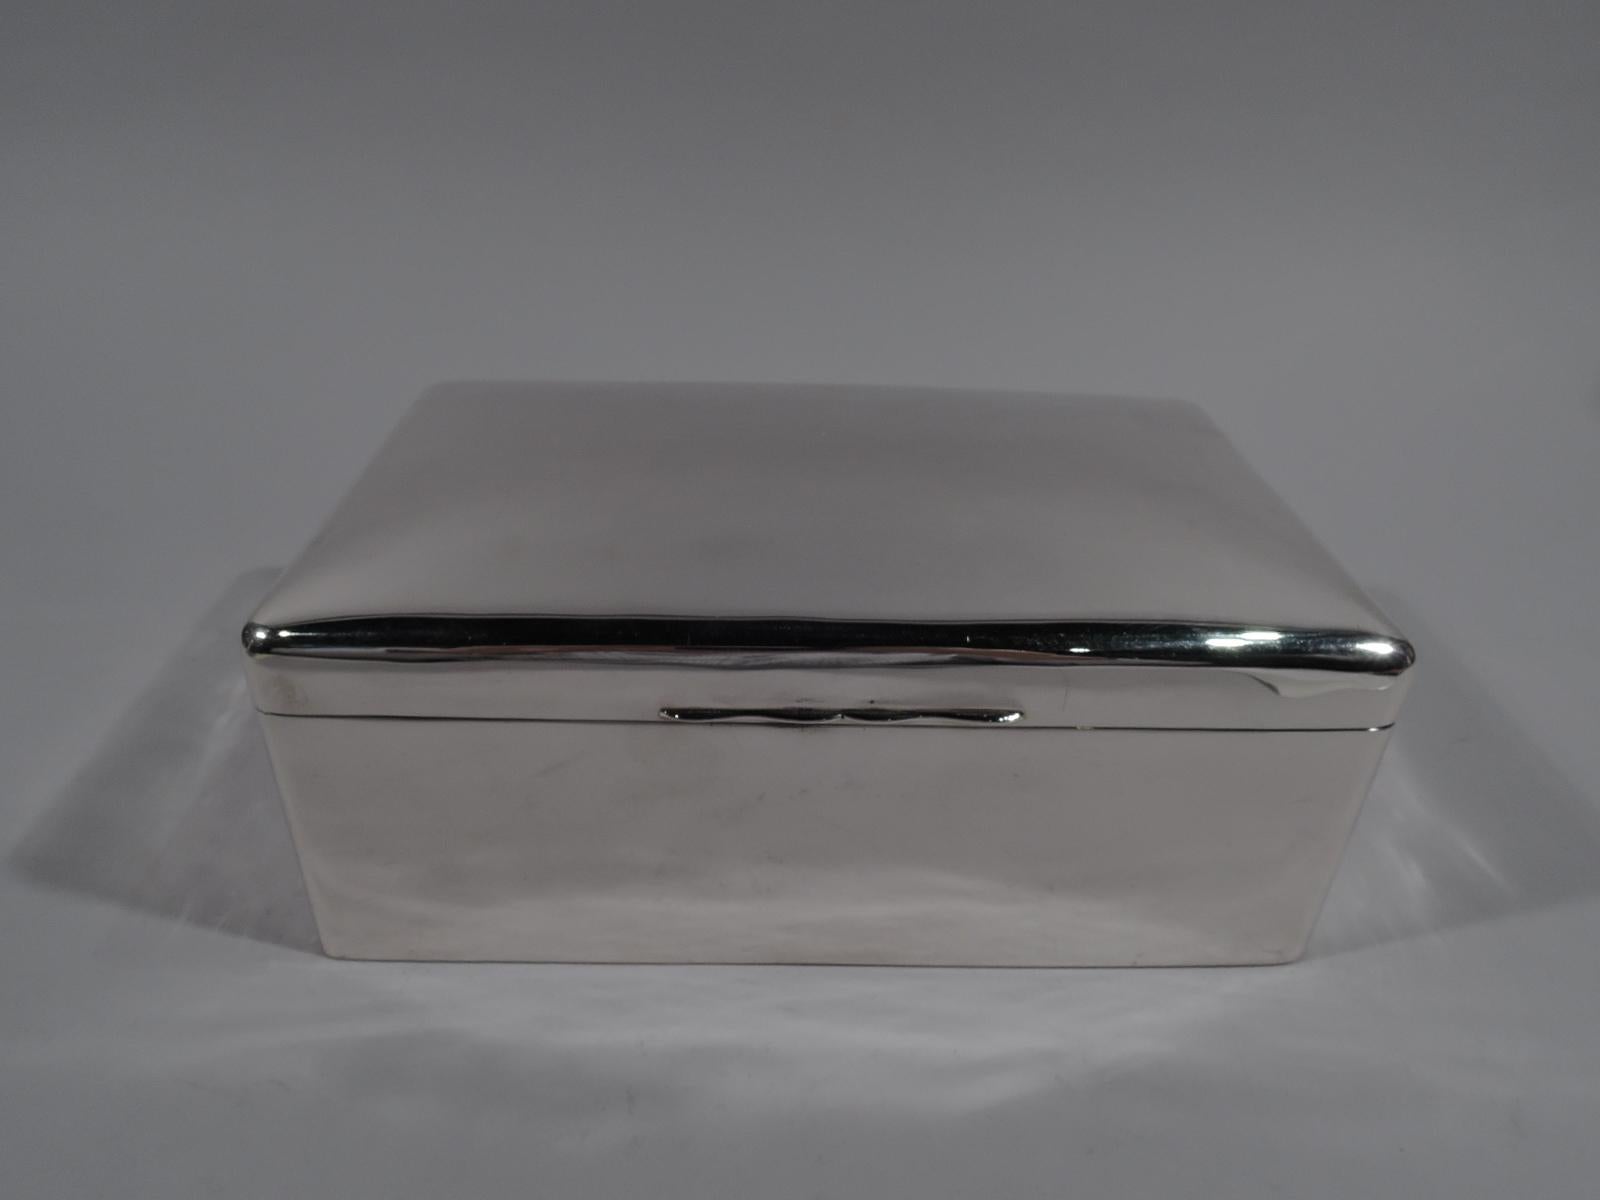 Large English sterling silver box, 1919. Rectangular with curved corners. Cover flat, hinged, and tabbed. Box interior cedar lined and partitioned. Underside leather-lined. Cover interior gilt washed. A capacious receptacle. Fully marked including